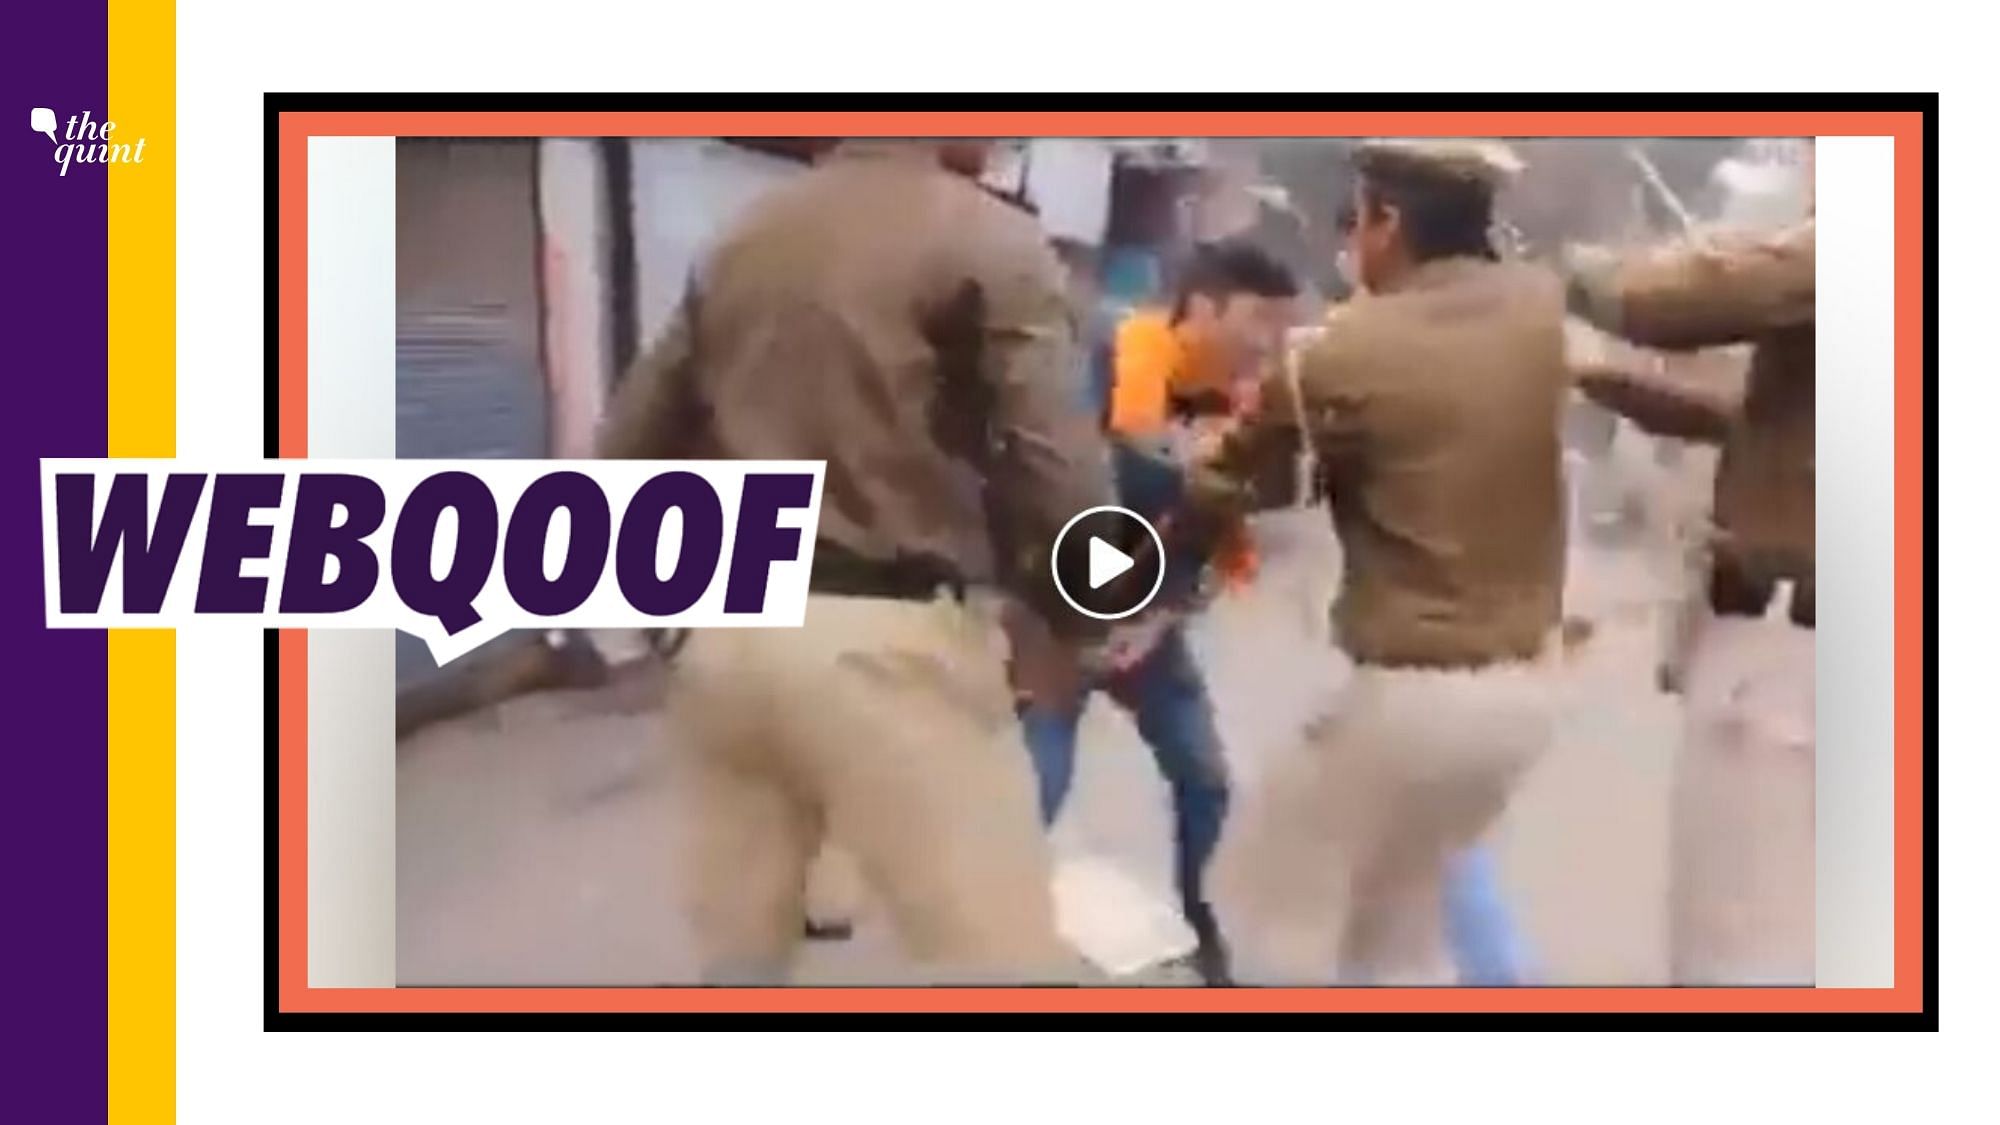 A video is being circulated on Facebook with a claim that it is from Lucknow and shows police brutally beating up students.